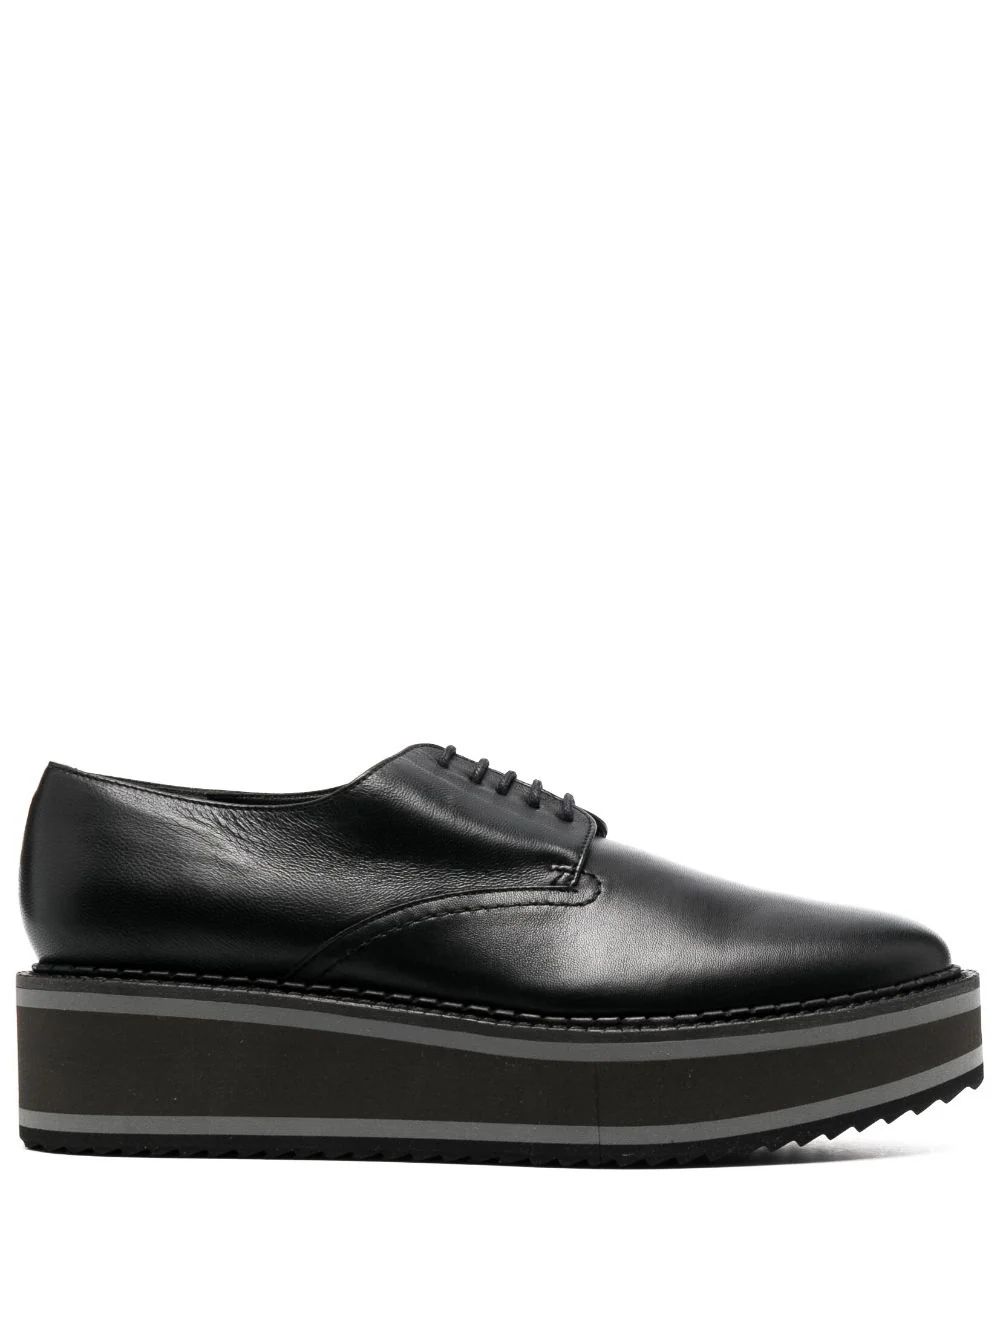 Clergerie Brook 60mm Leather Shoes - Farfetch | Farfetch Global